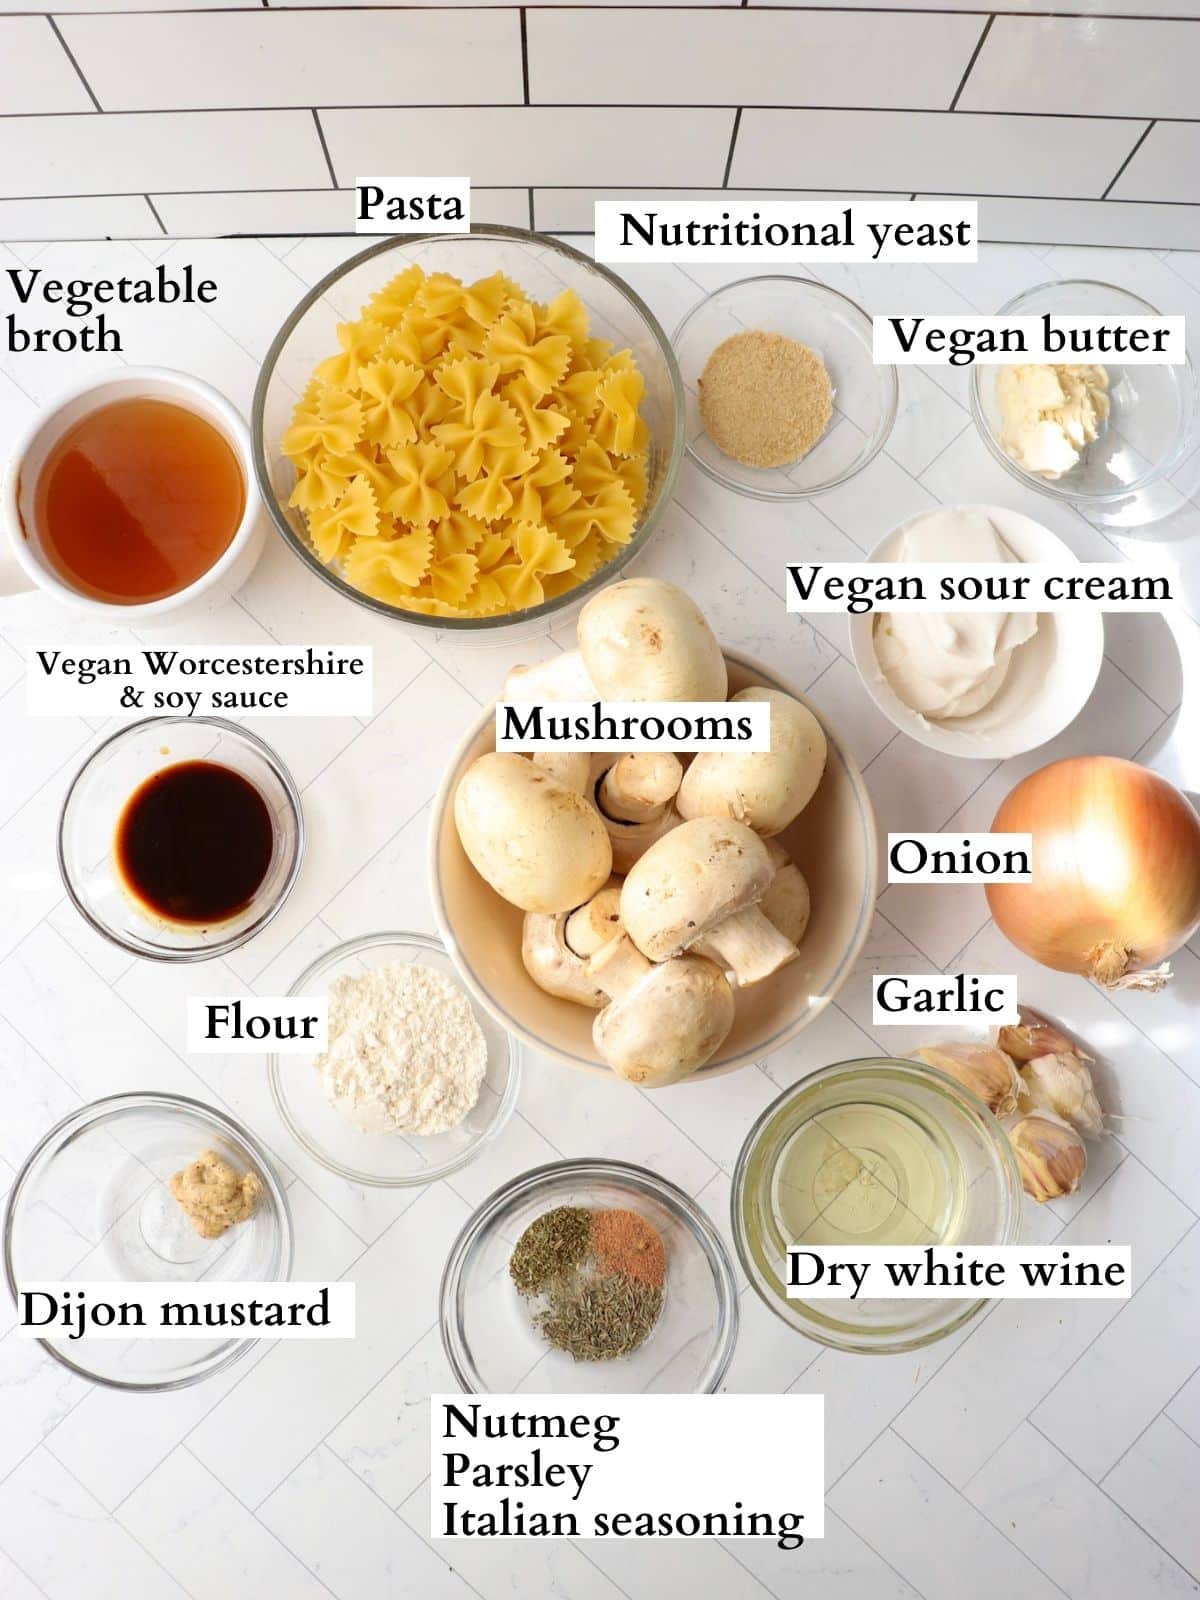 Ingredients for vegan mushroom stroganoff in small bowls on a kitchen counter.